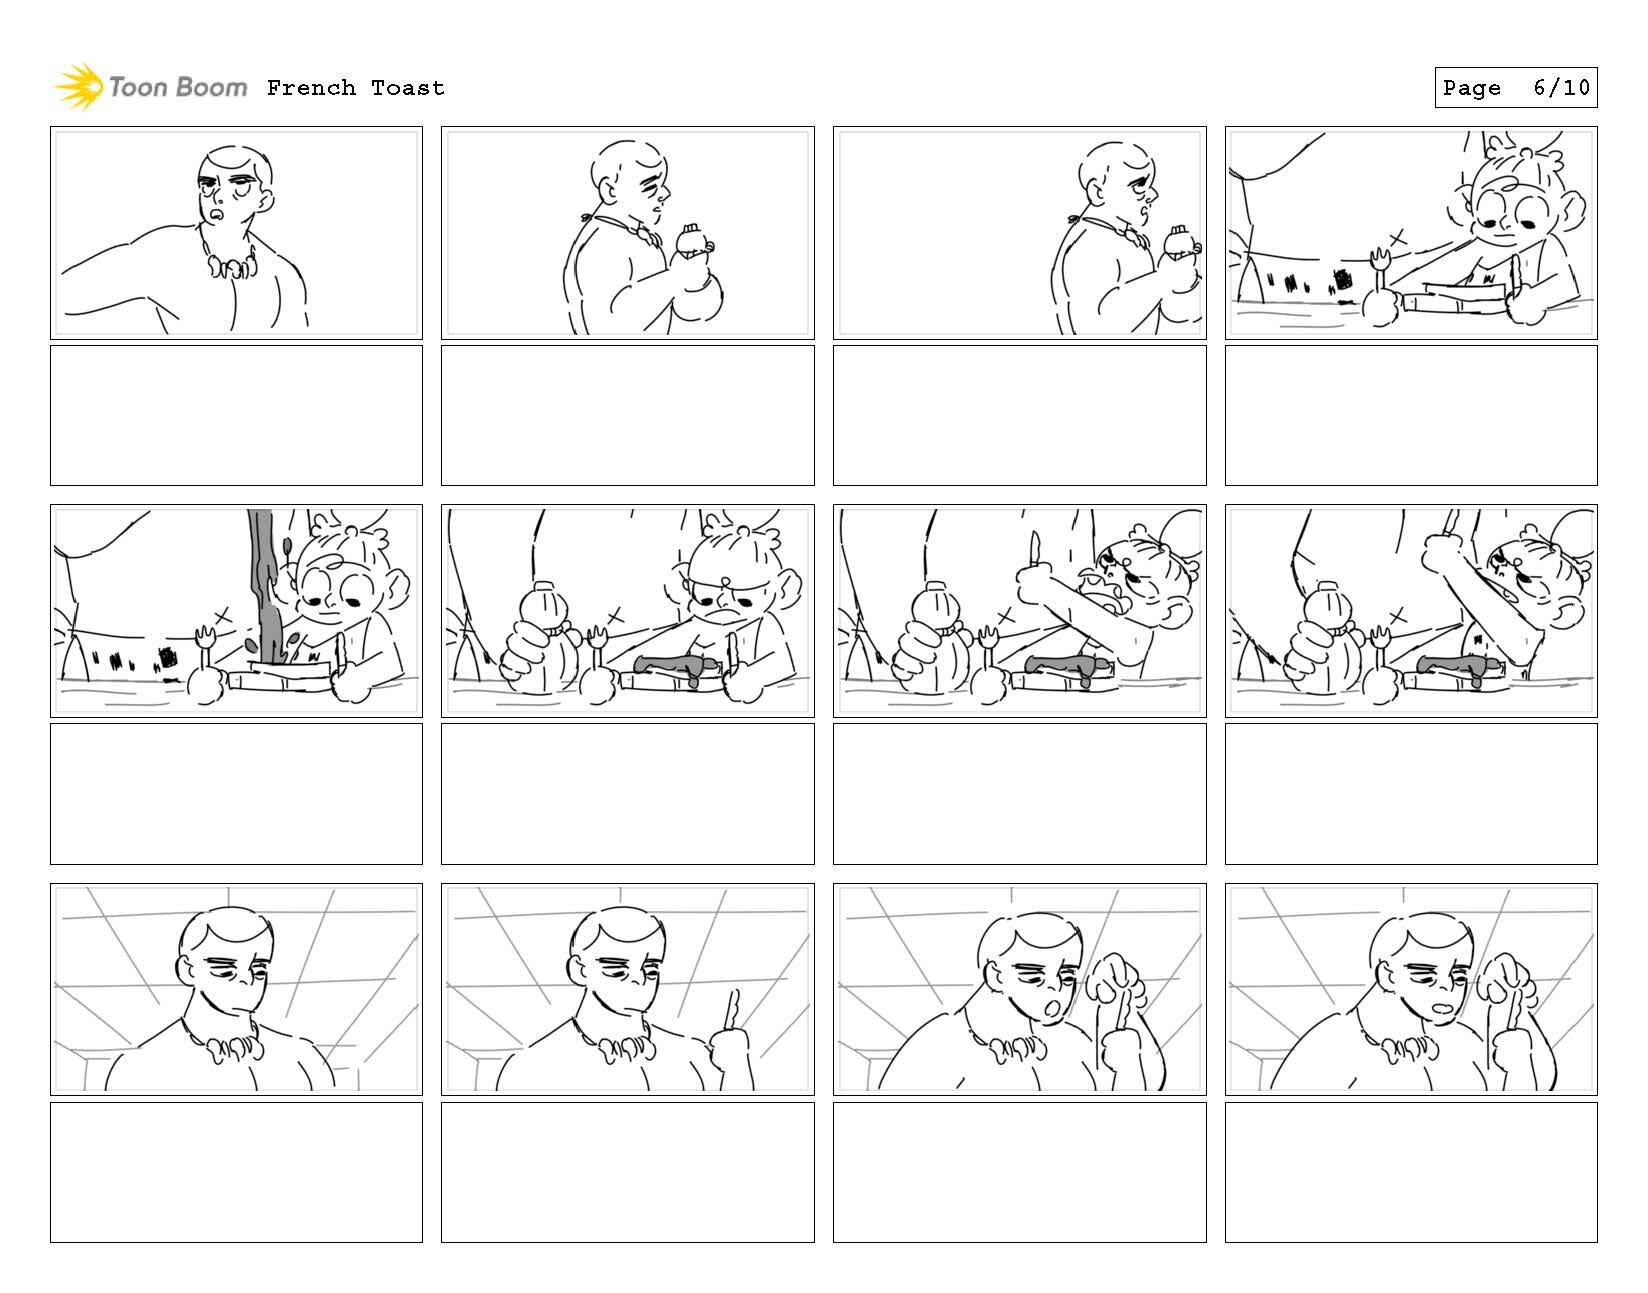 french toast mini thumbs_Page_07.jpg